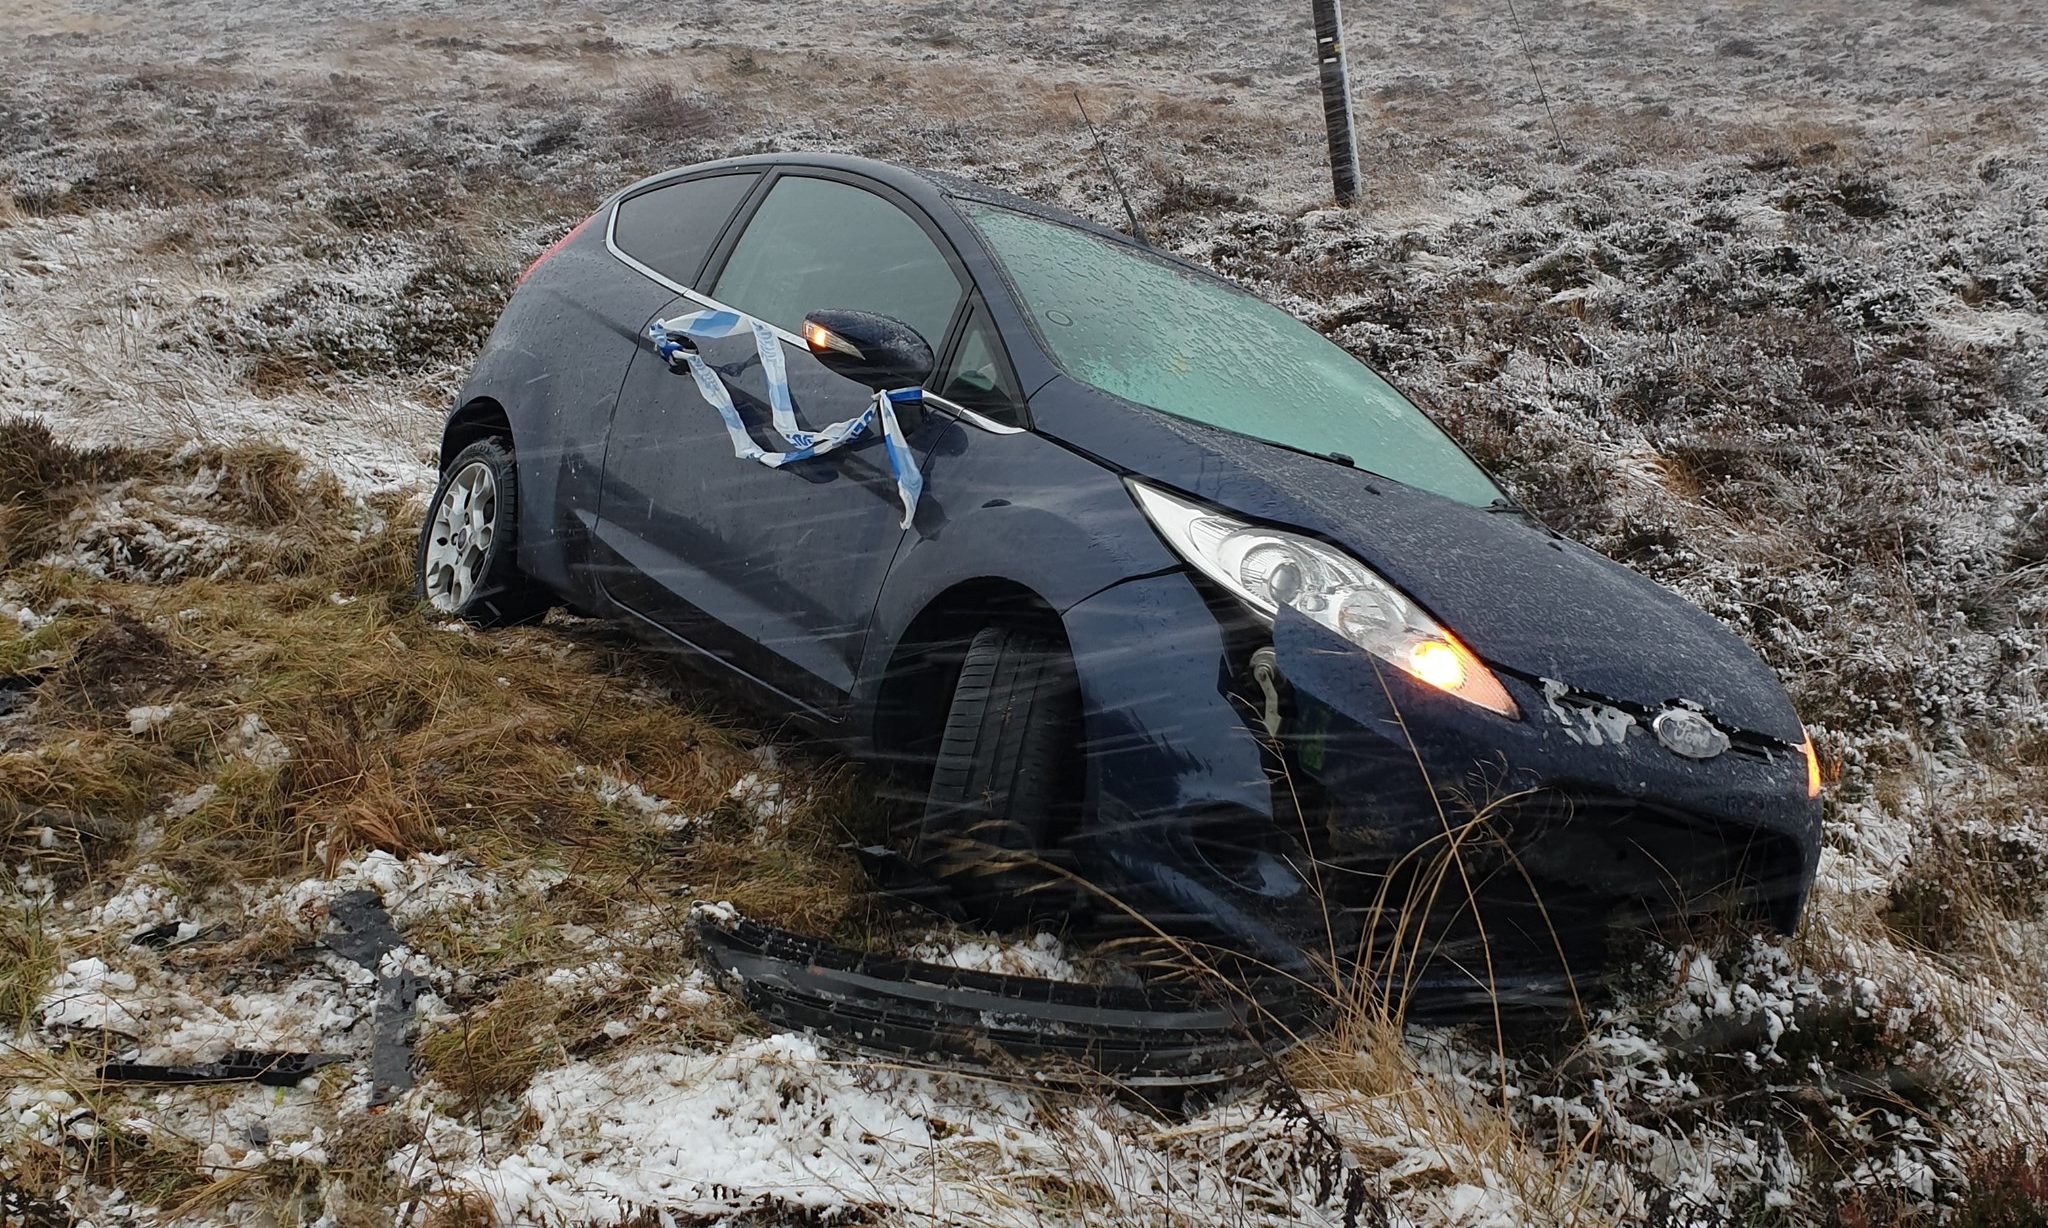 A car off the road following today's wintry conditions.